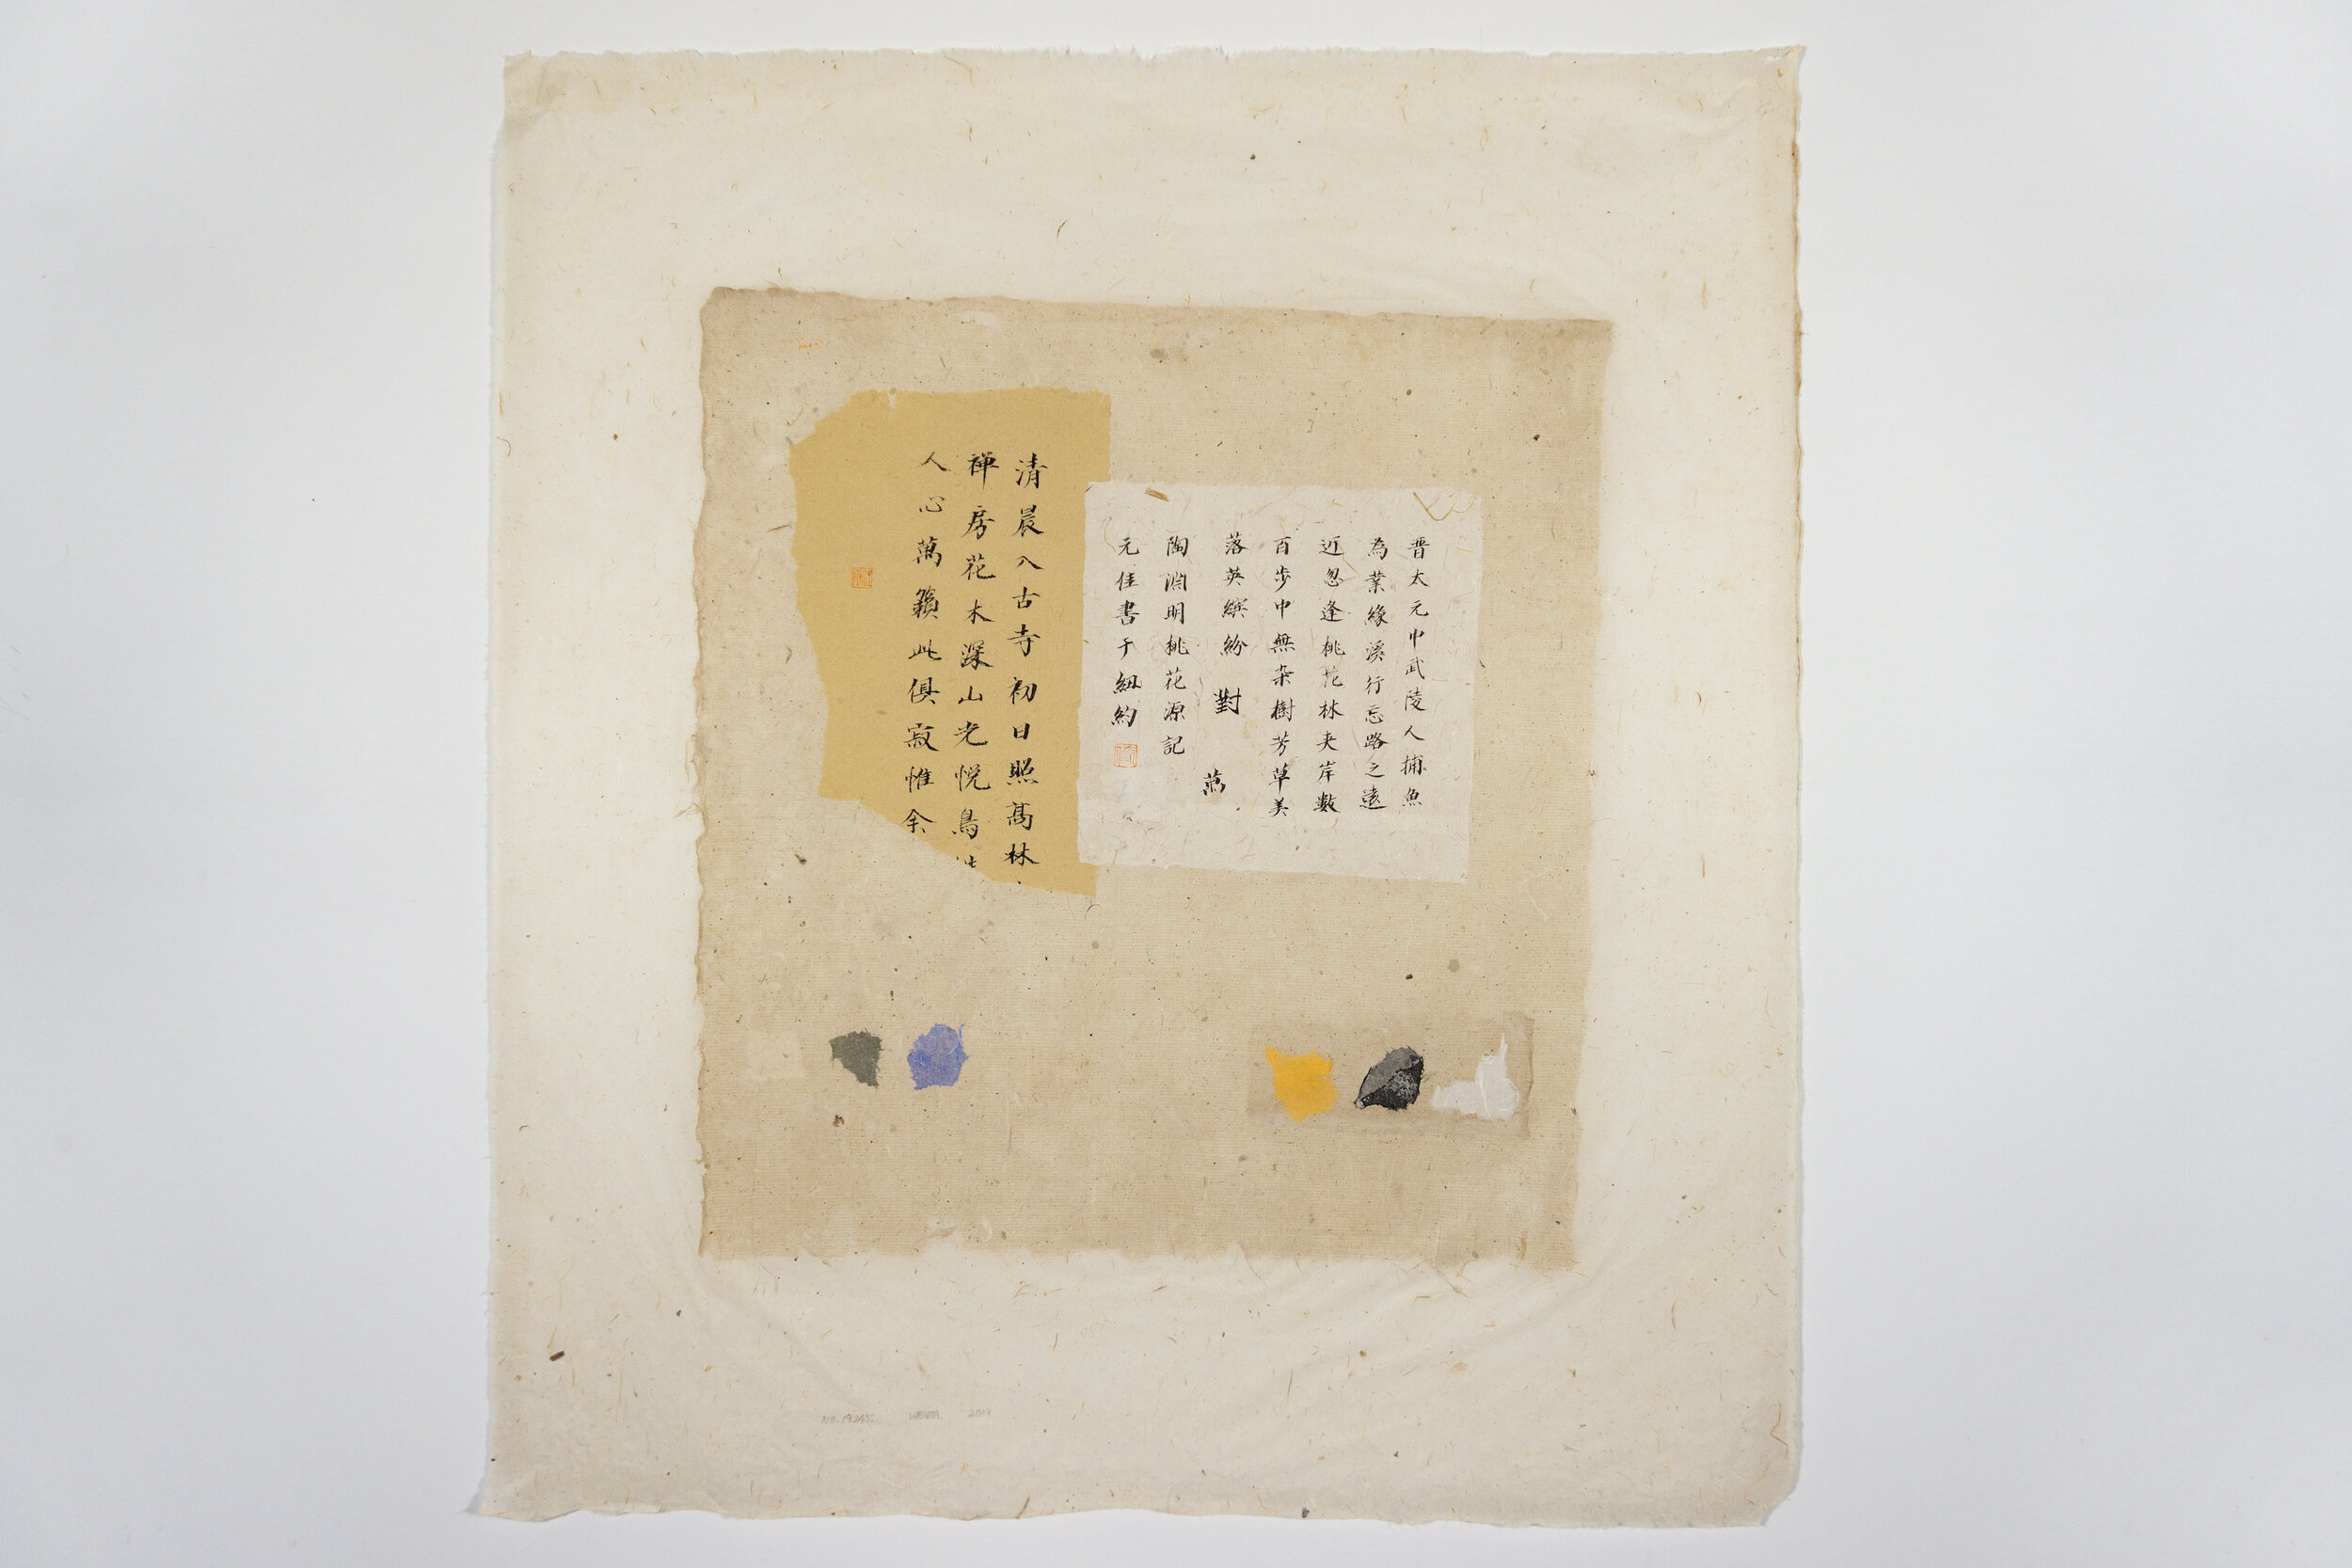  Wei Jia,  No. 19245,  2019. Gouache, ink and Xuan paper, collage on paper, 29 1/2 x 26 1/4 inches ©Wei Jia, courtesy Fou Gallery   